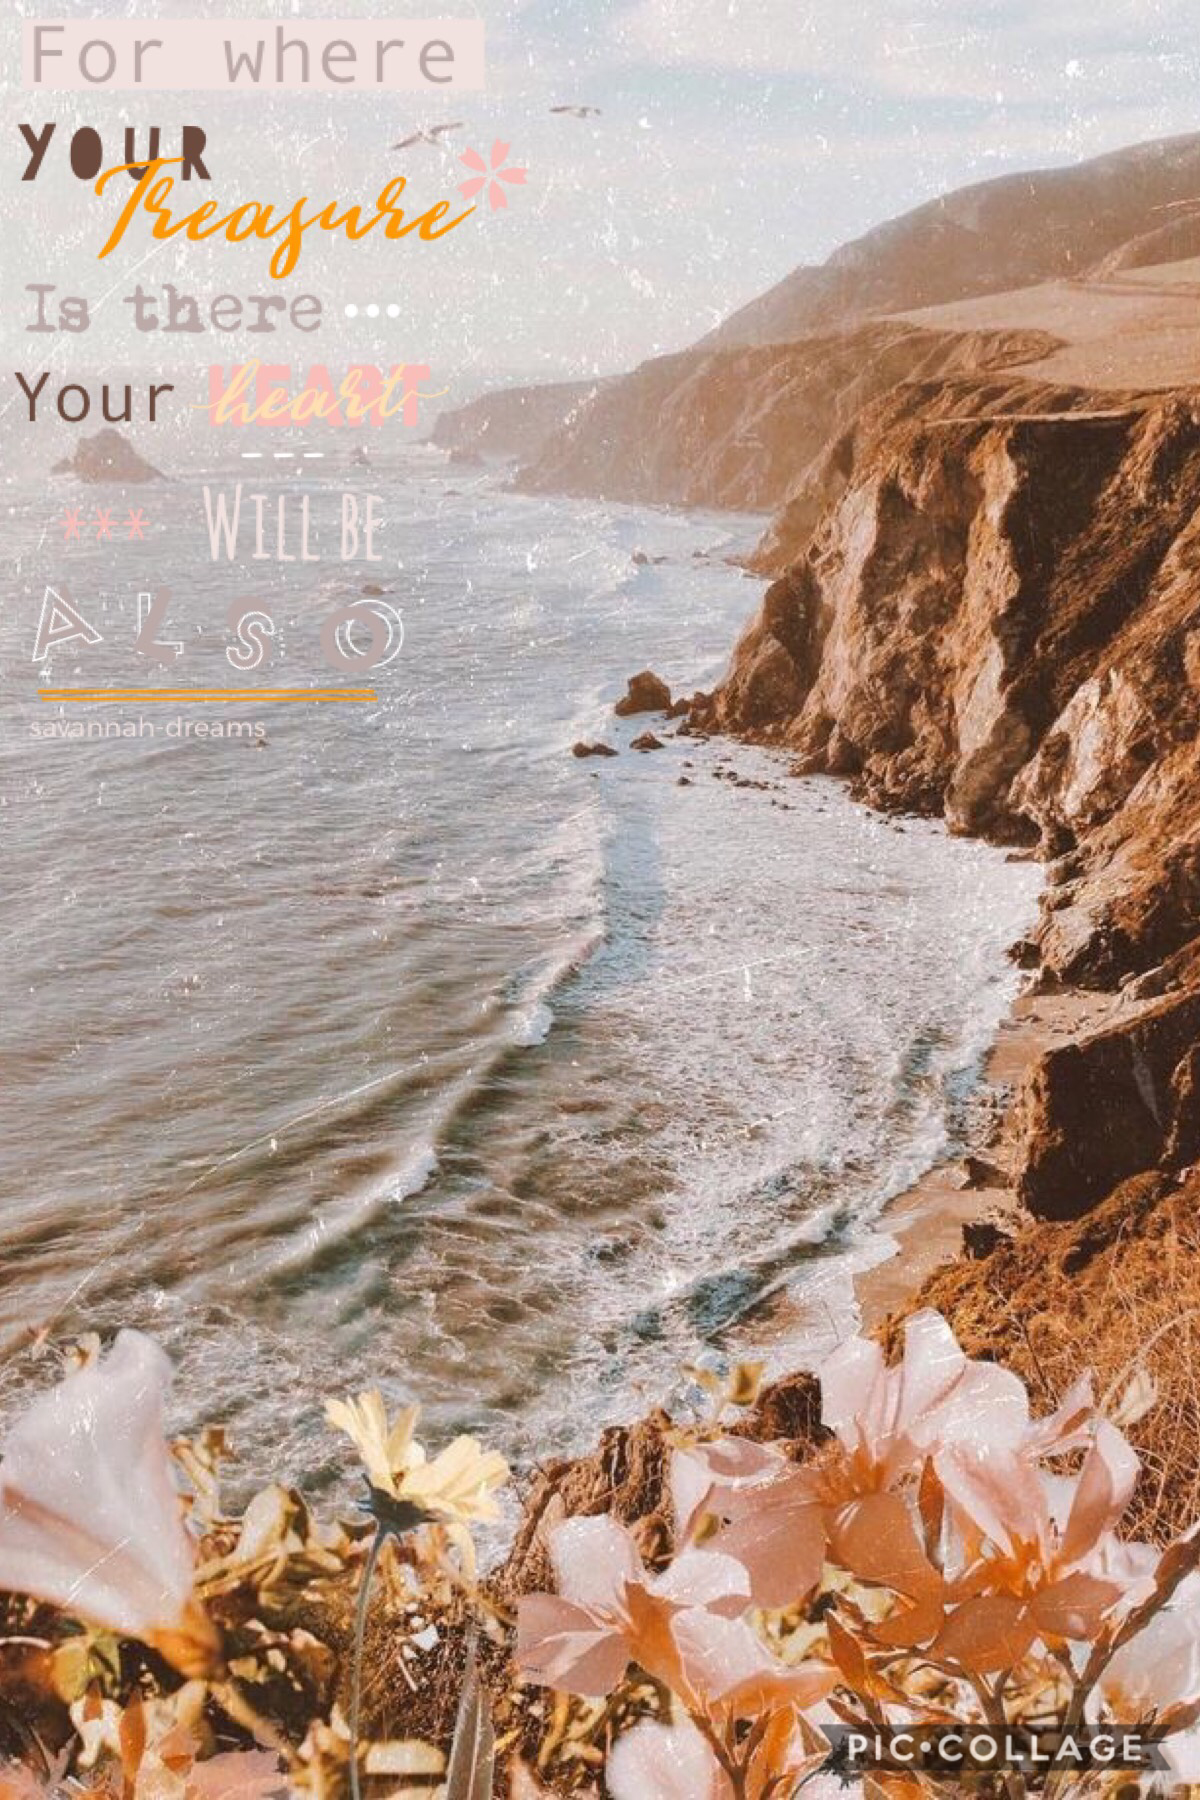 woah I love this background so much ☁️ plz rate from 1-10 🌸